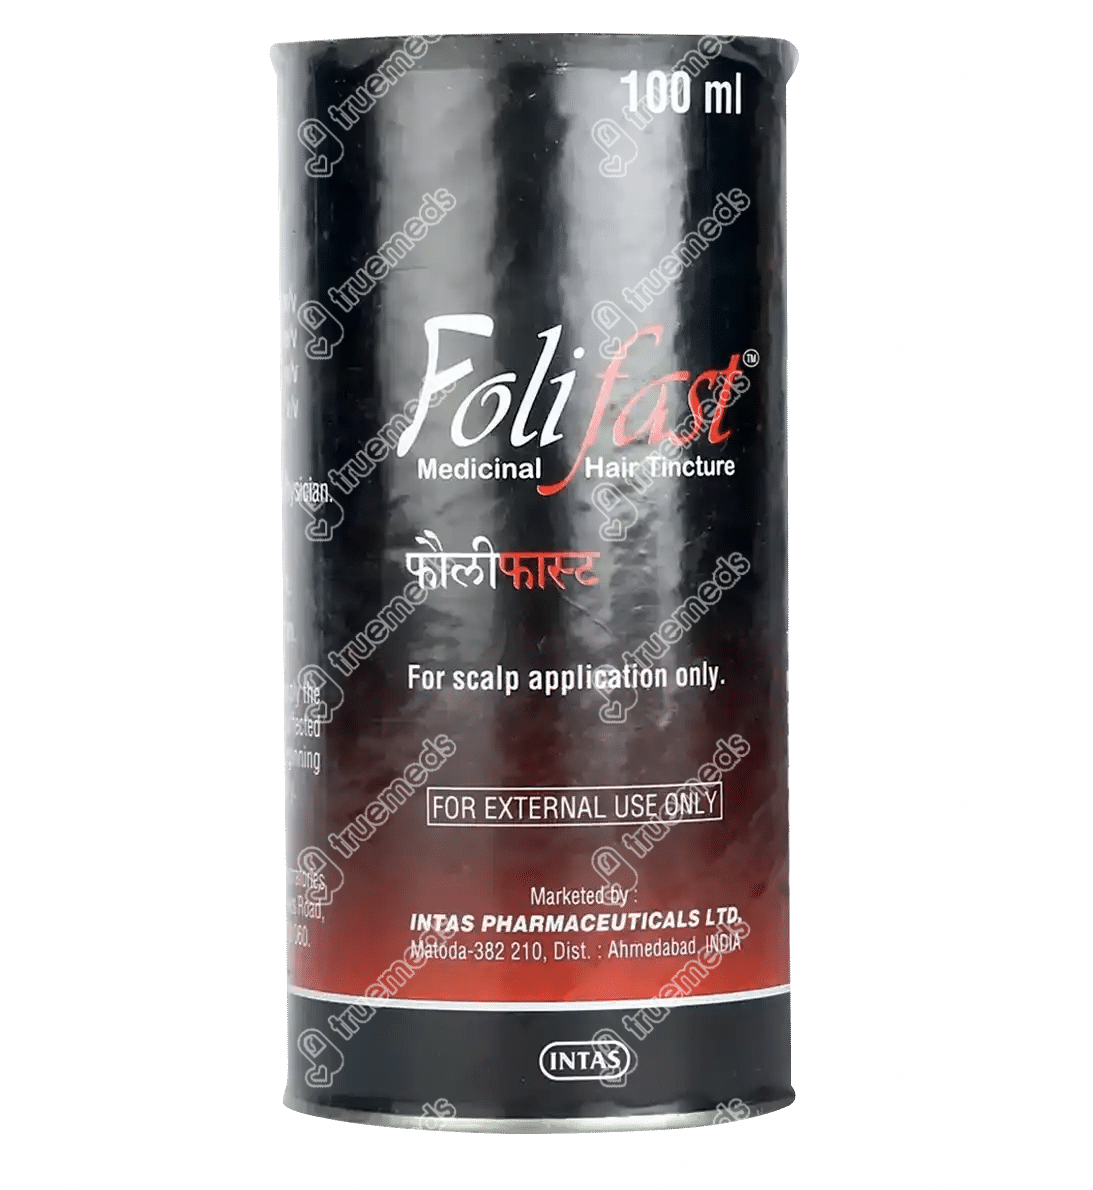 Folifast Medicinal Hair Tincture 100 ML - Uses, Side Effects, Dosage, Price  | Truemeds